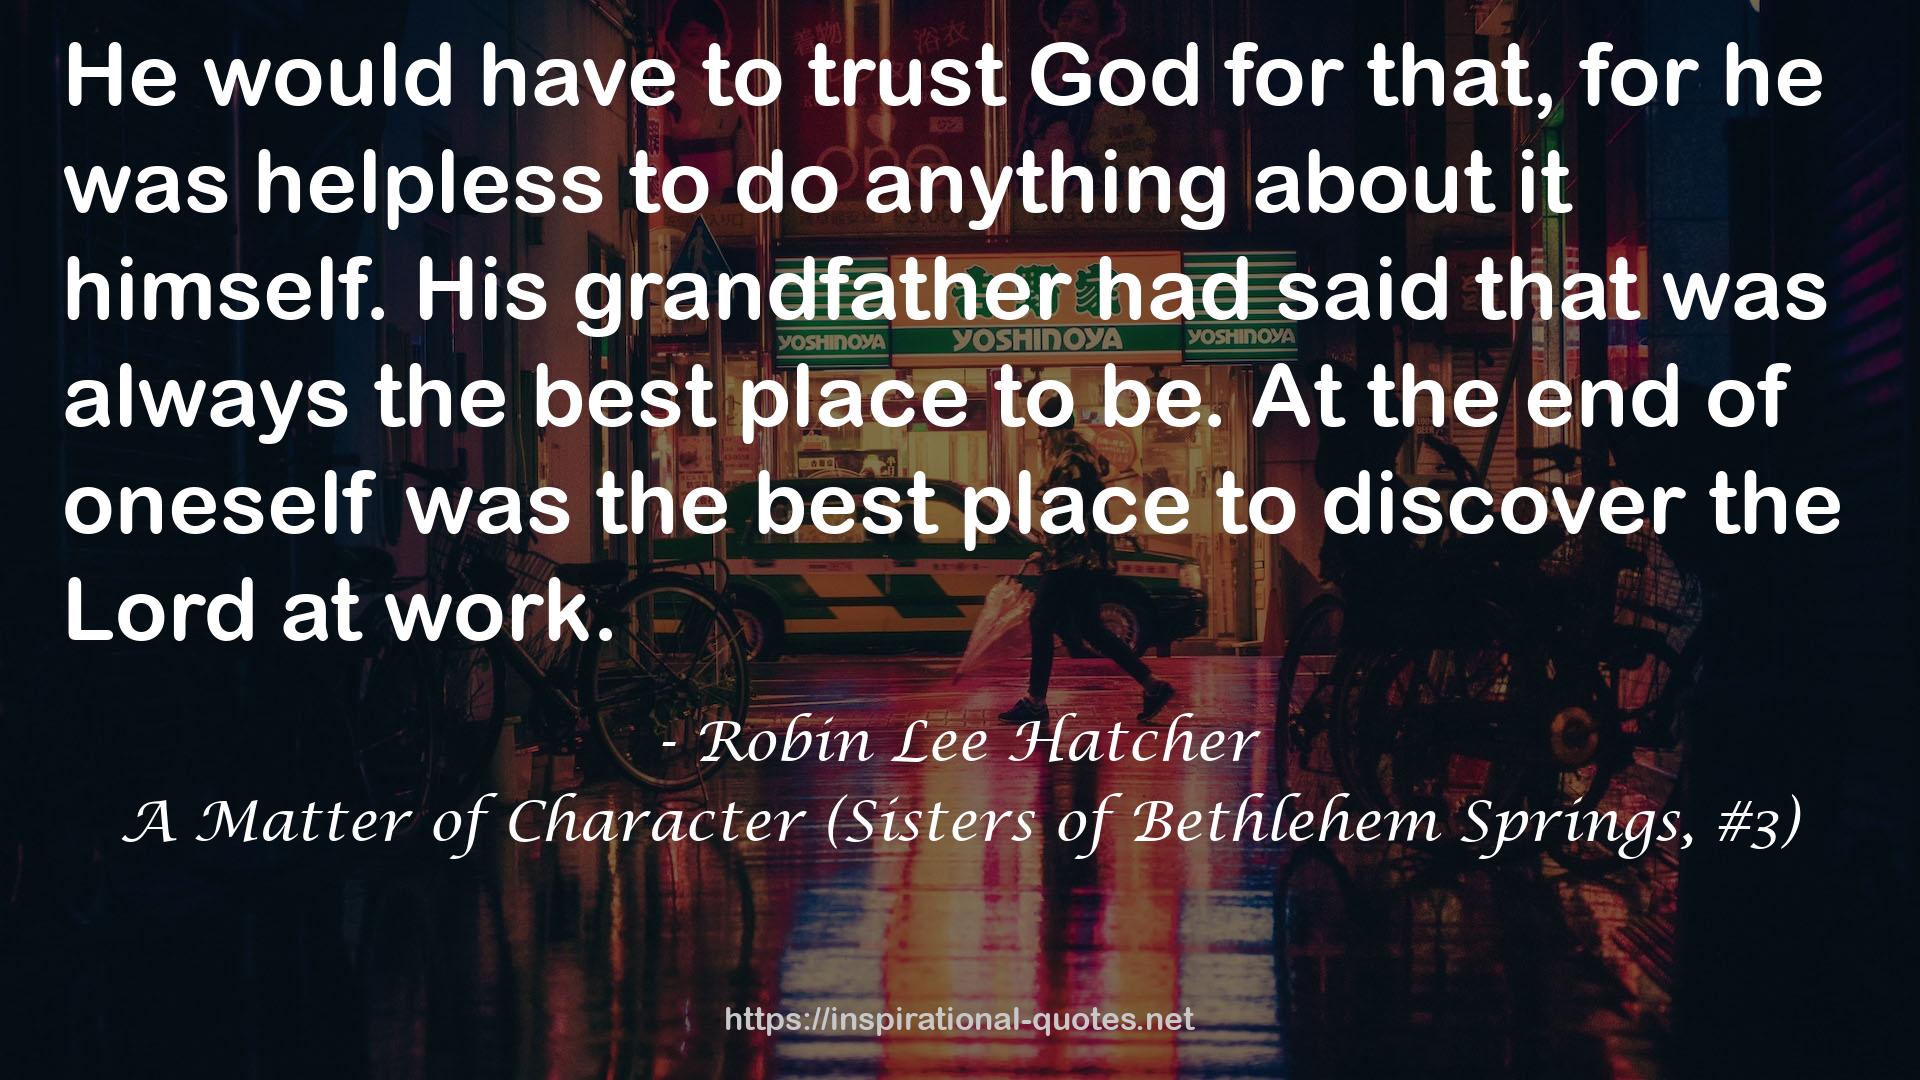 A Matter of Character (Sisters of Bethlehem Springs, #3) QUOTES